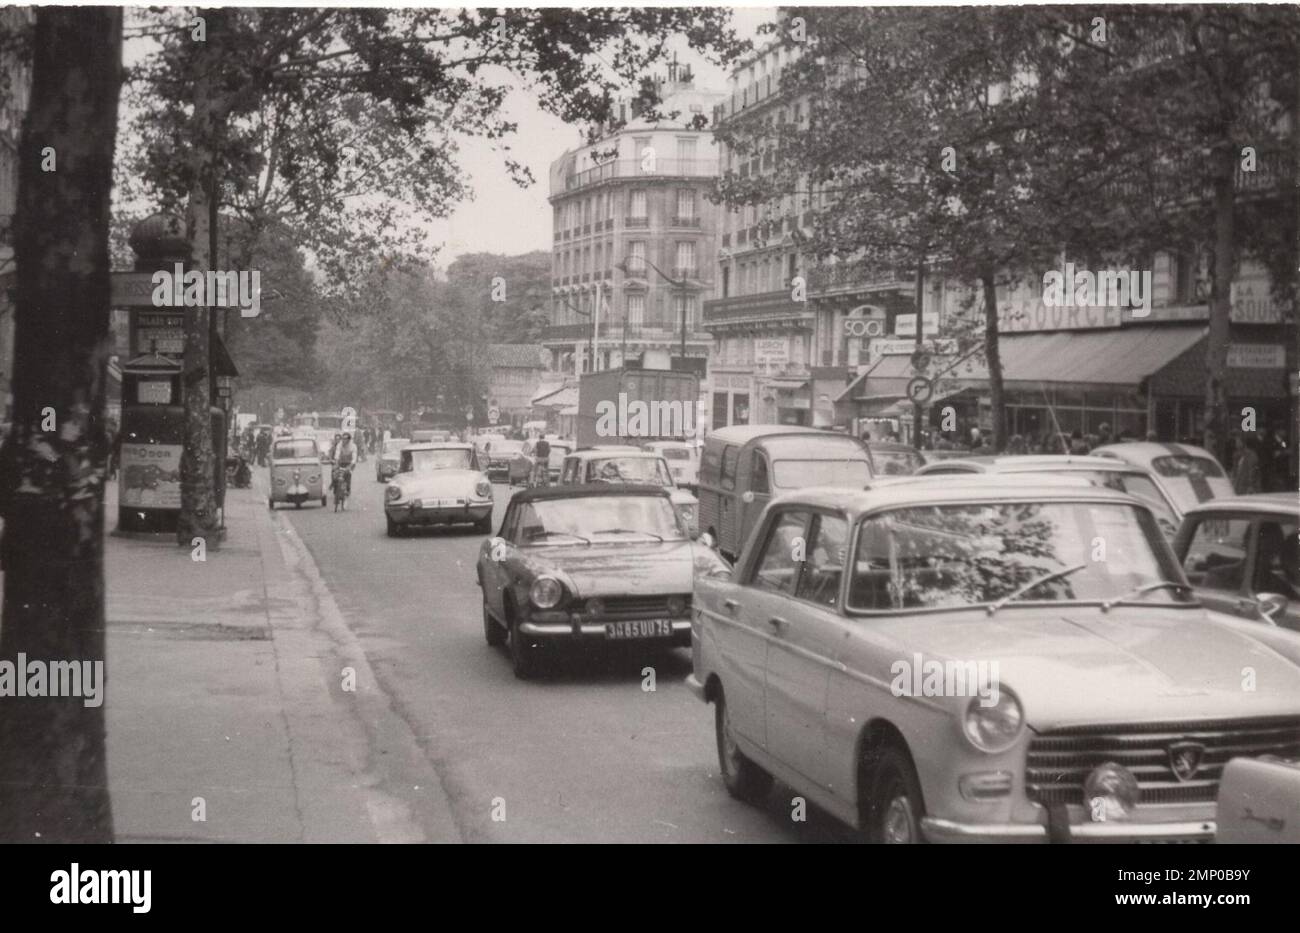 vintage moment / vintage funny moment / vintage photograph / power of the moment / magic moments / vintage street view possibly from France at the 1960's- there are lots of french cars bicycle and tuc tuc. it was  a busy day possibly a monday :) Stock Photo